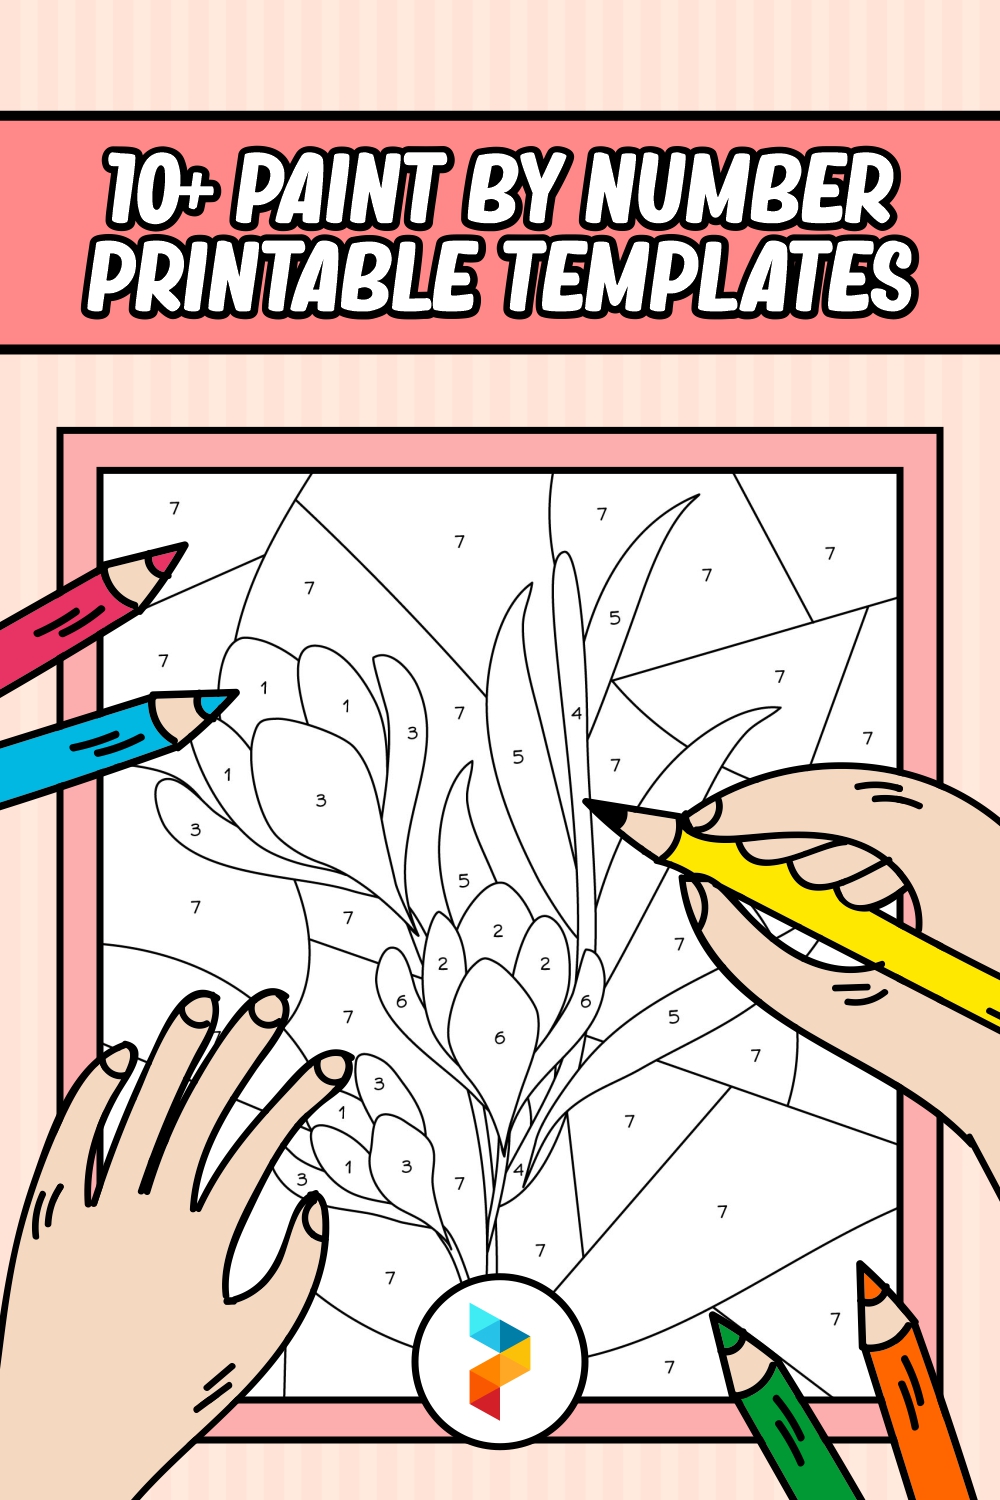 Paint By Number Printable Templates